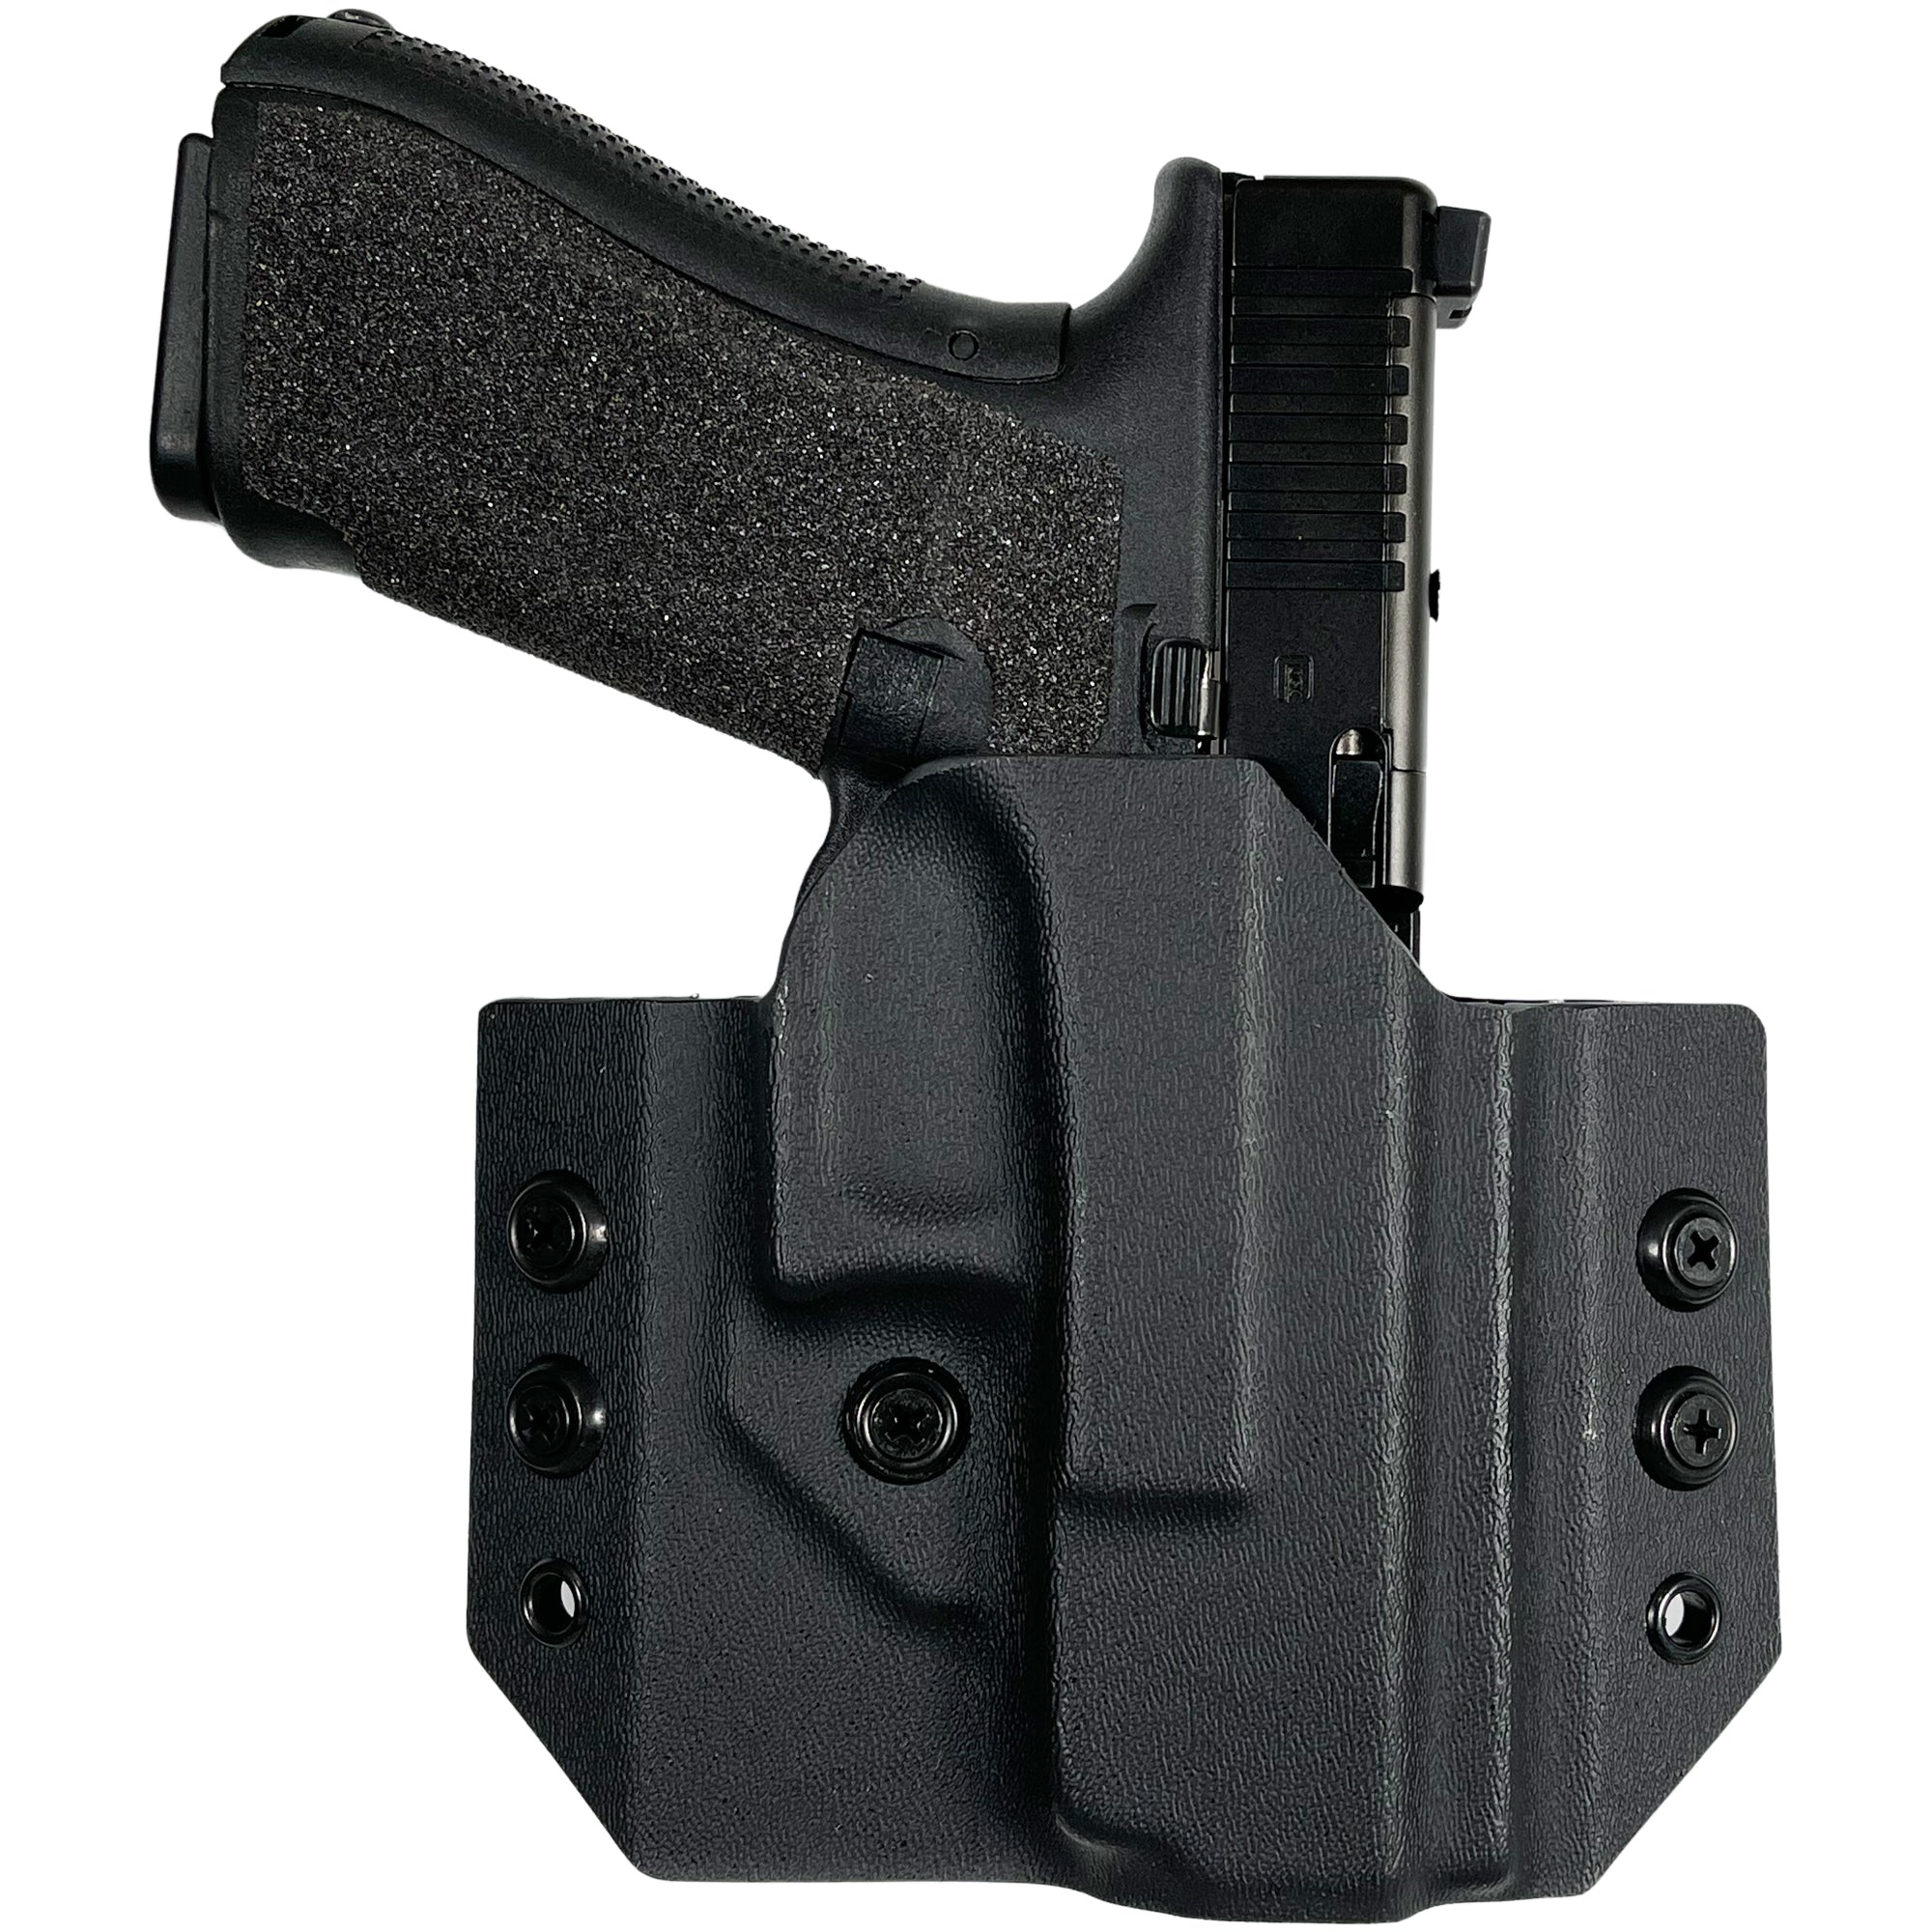 Glock 19, 19X, 23, 32 OWB Curved Holster